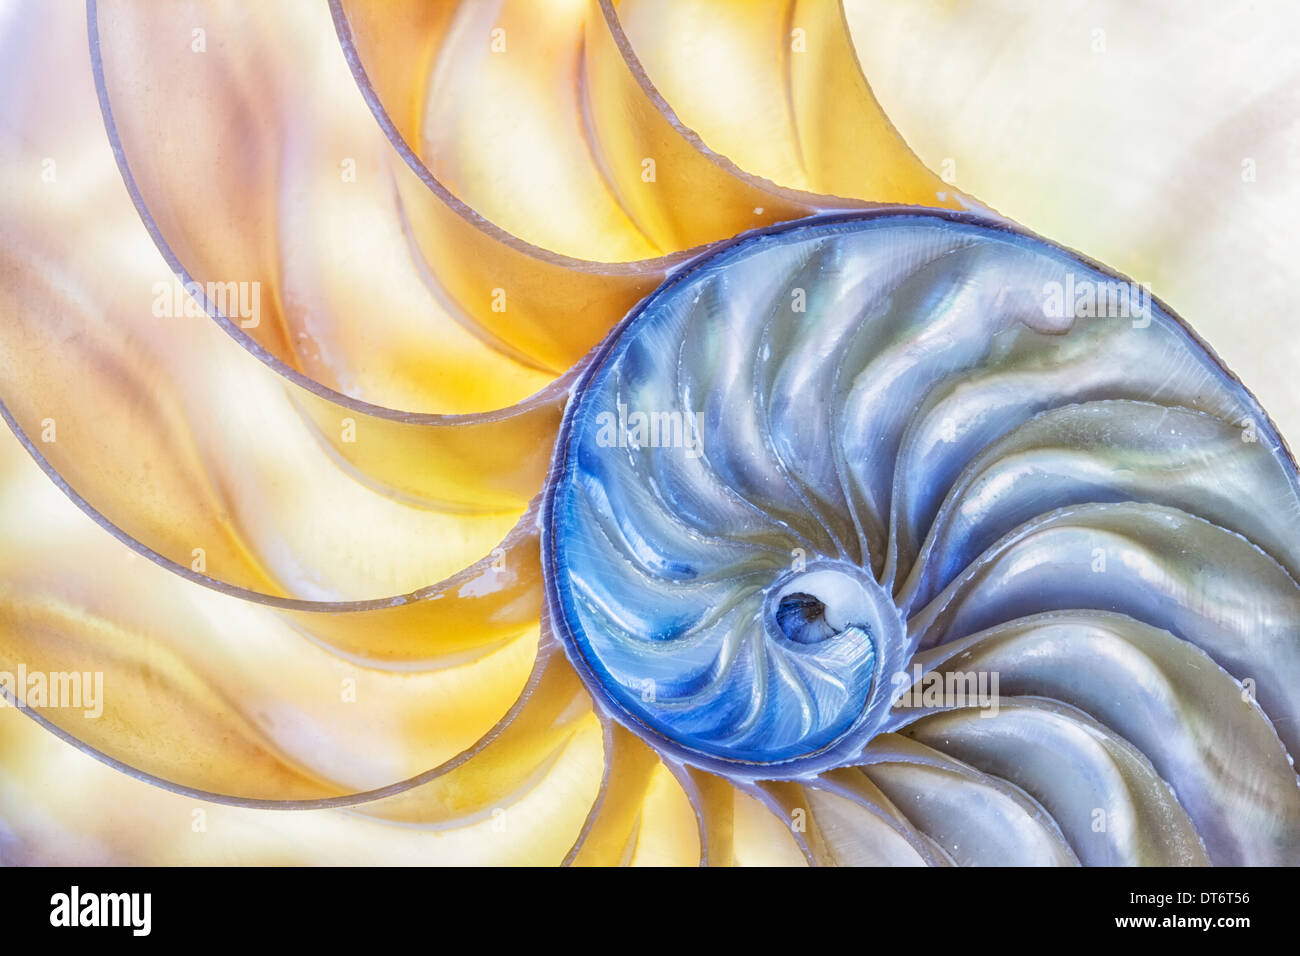 The wonder of nature captured in a nautilus shell. Stock Photo